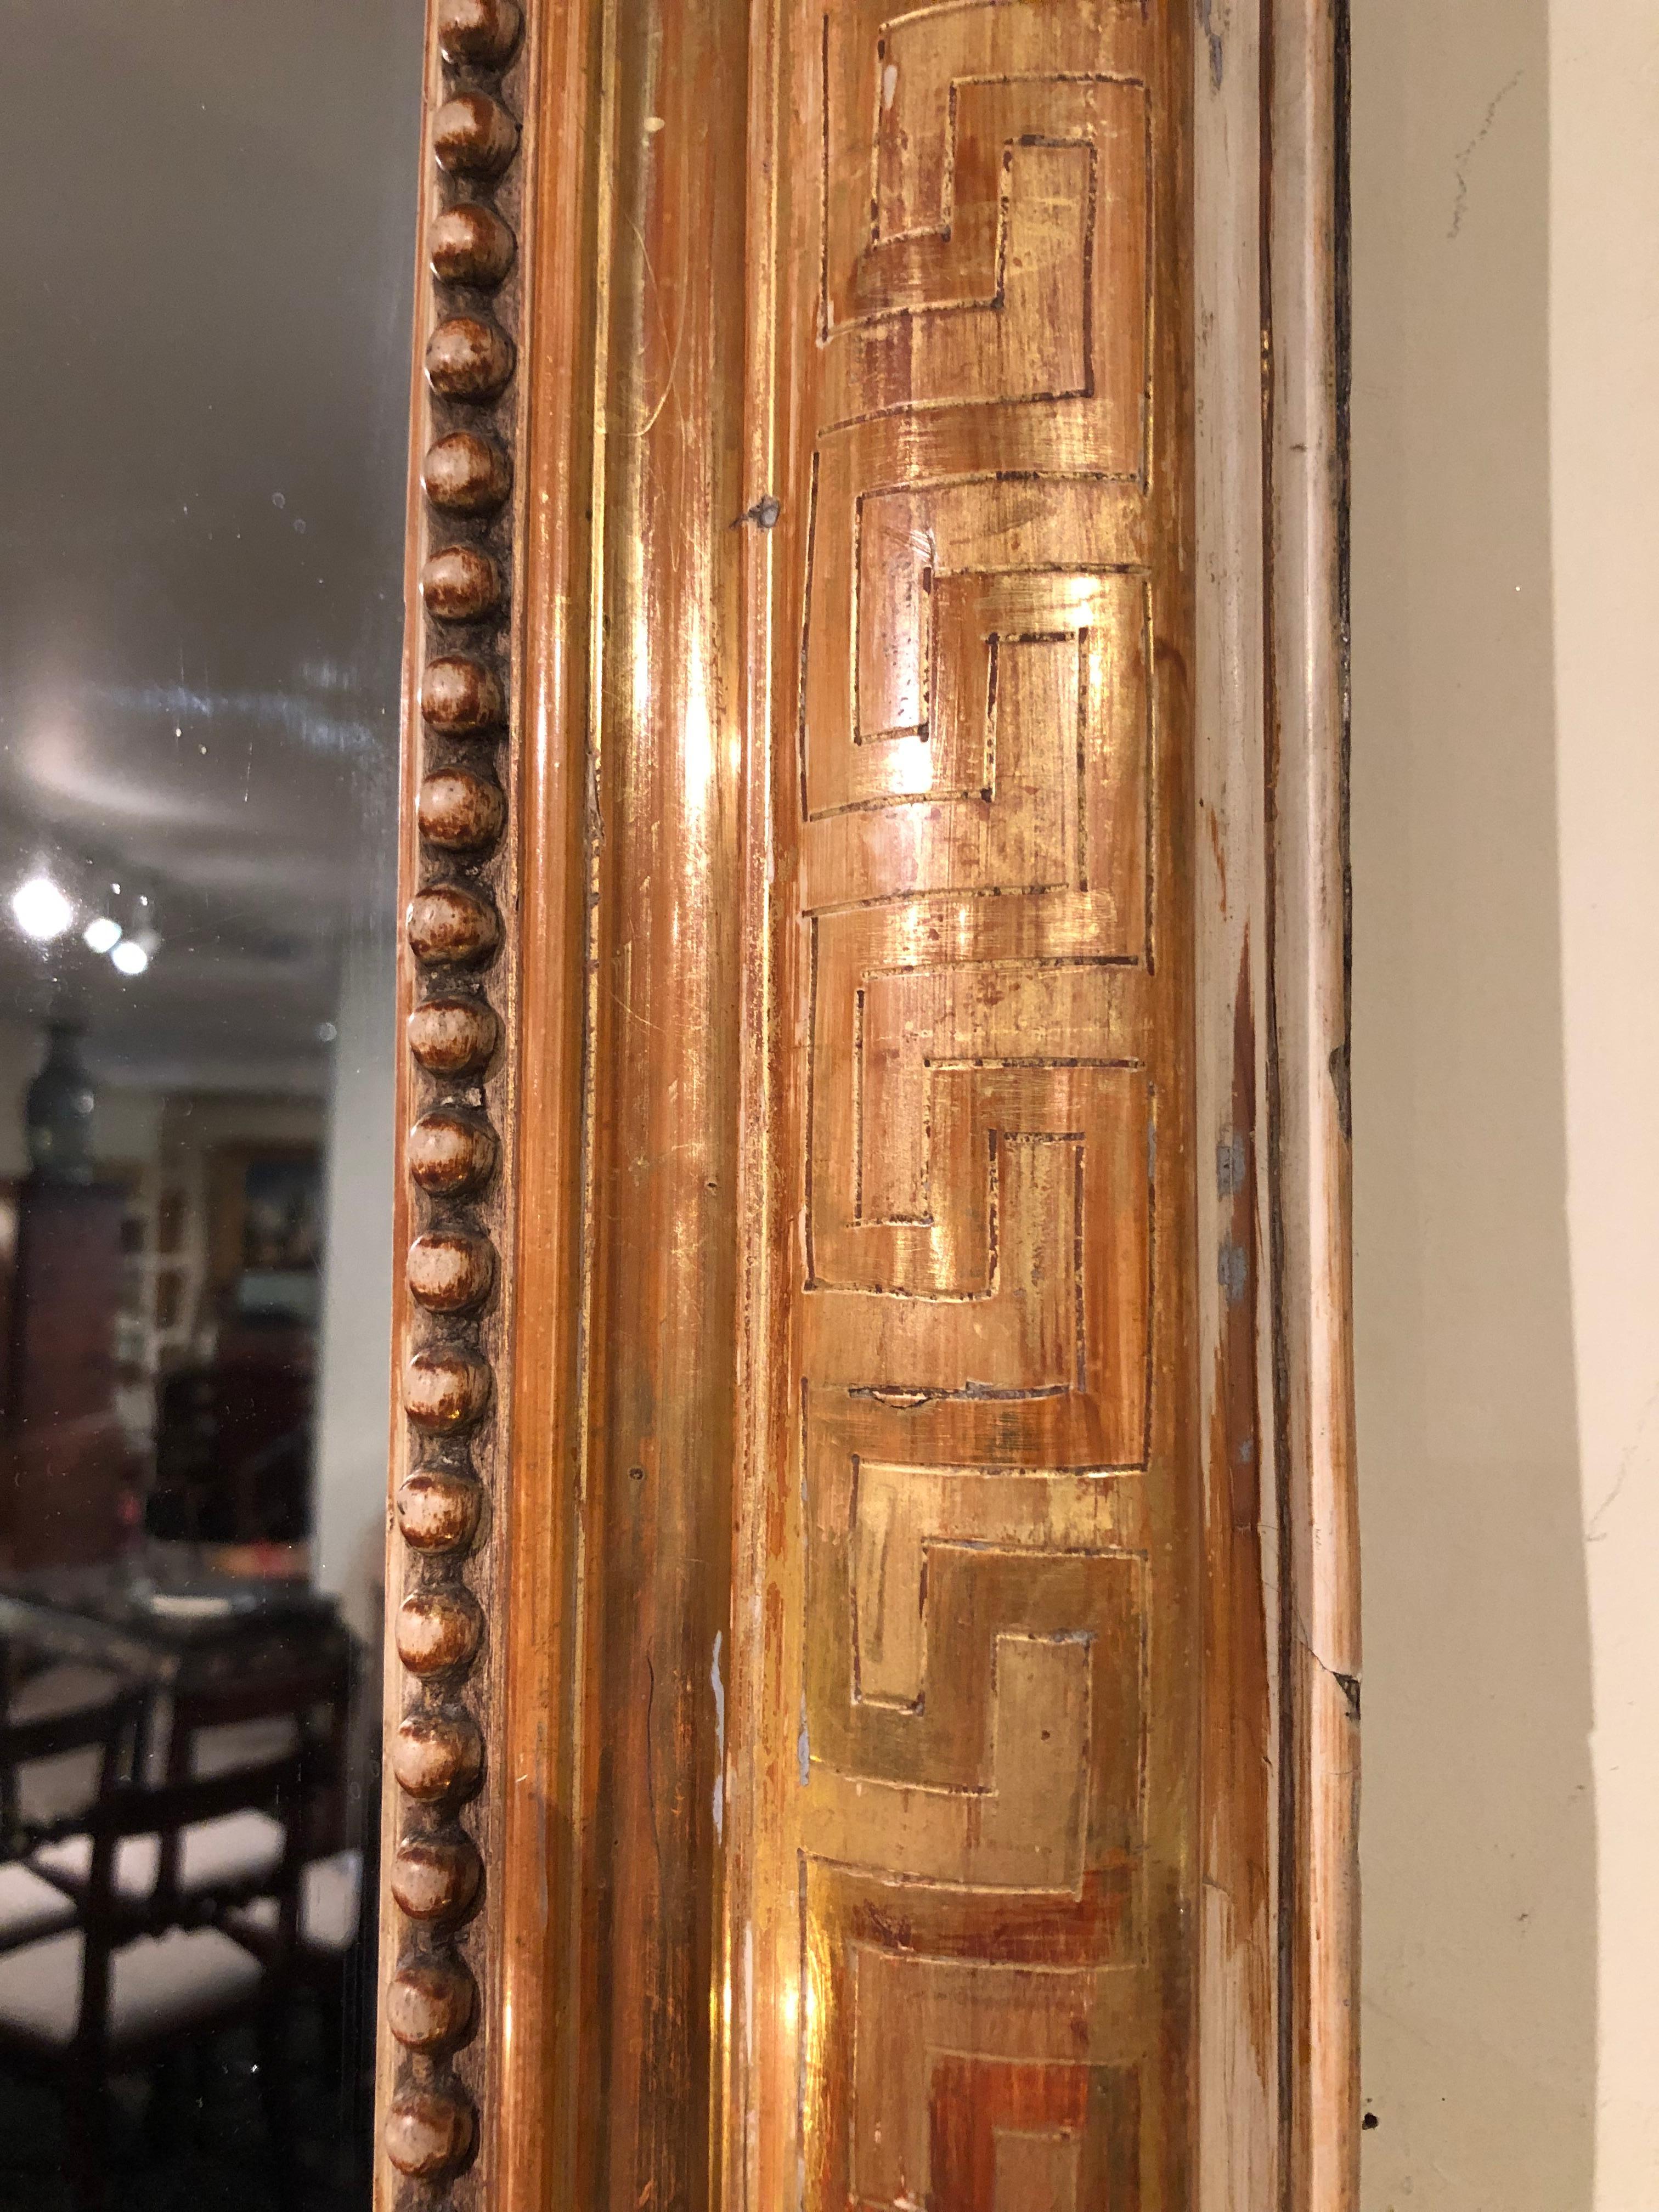 Very large 19th century gold leaf Louis Philippe mirror in excellent original condition. Very rare Greek key decoration to the frame. Original mercury glass mirror plate, with only very slight marks as shown in the photos.